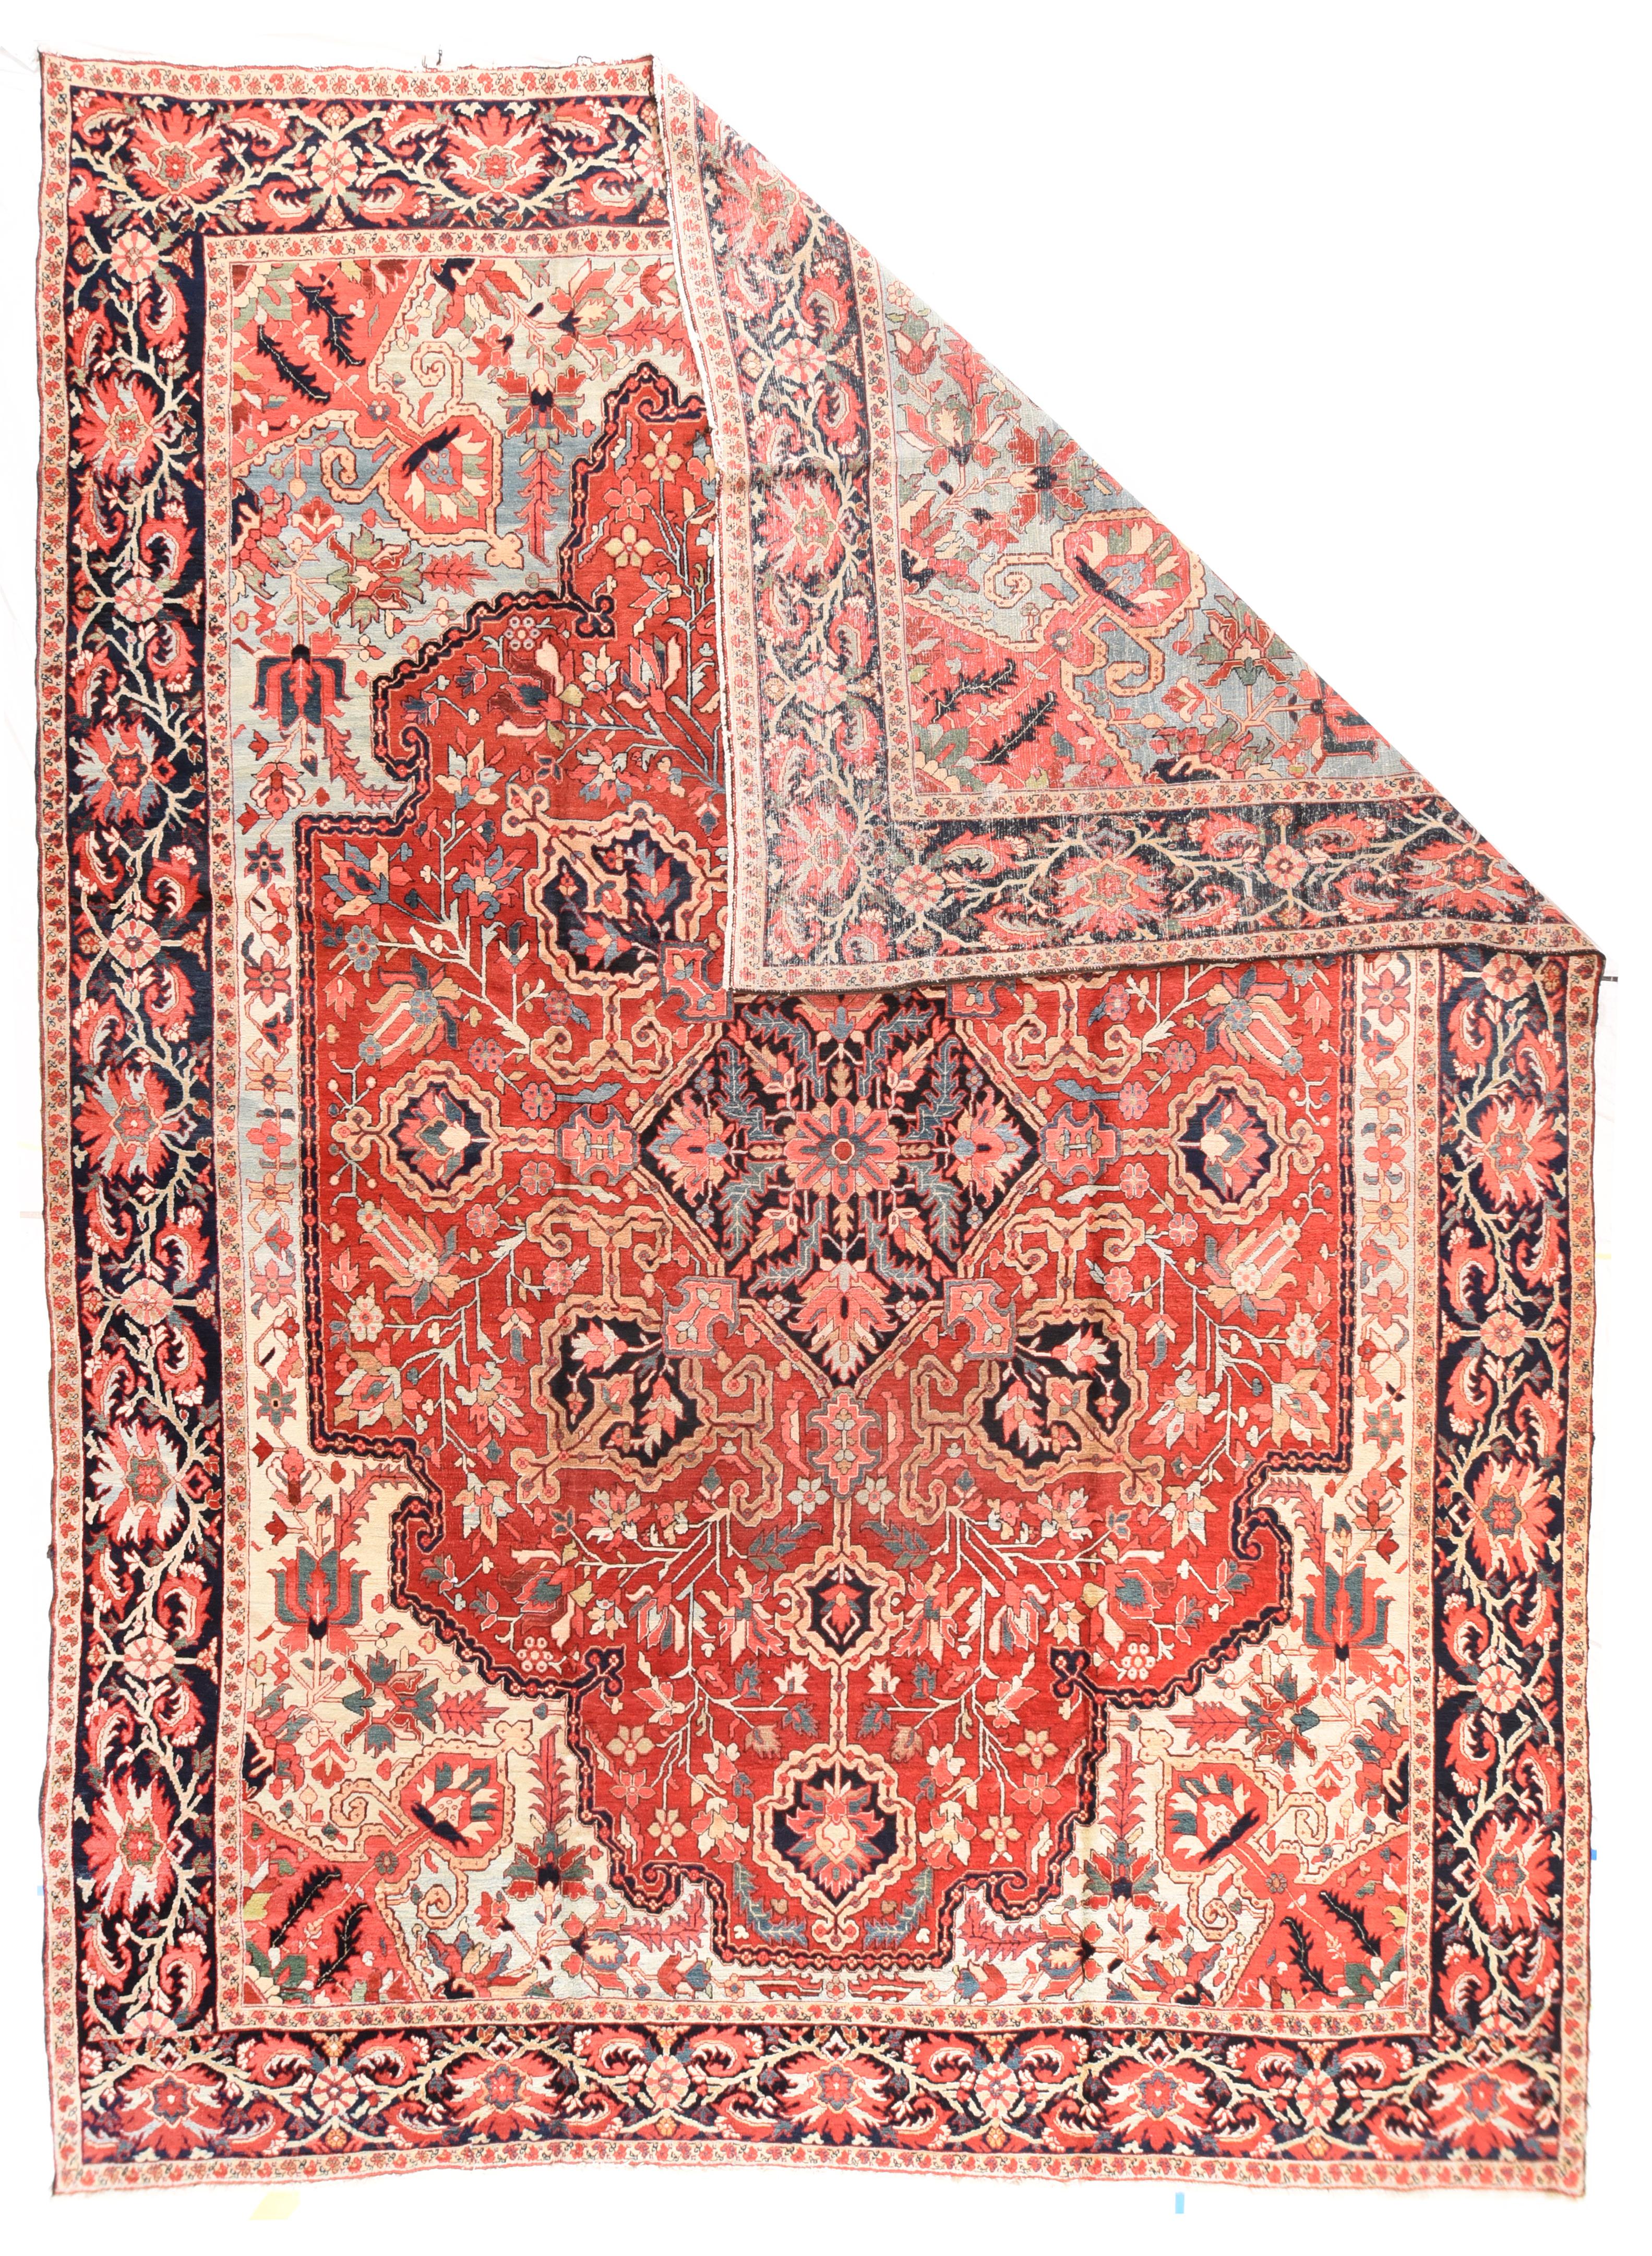 Antique Heriz Rug 11'8'' x 15'8''. The encompassing field abrashes from sky blue to powder to virtually sand, with diagonally in-projecting rust spadiform corners. The cartouche-shaped red subfield is centred by a navy, diamond shaped palmette